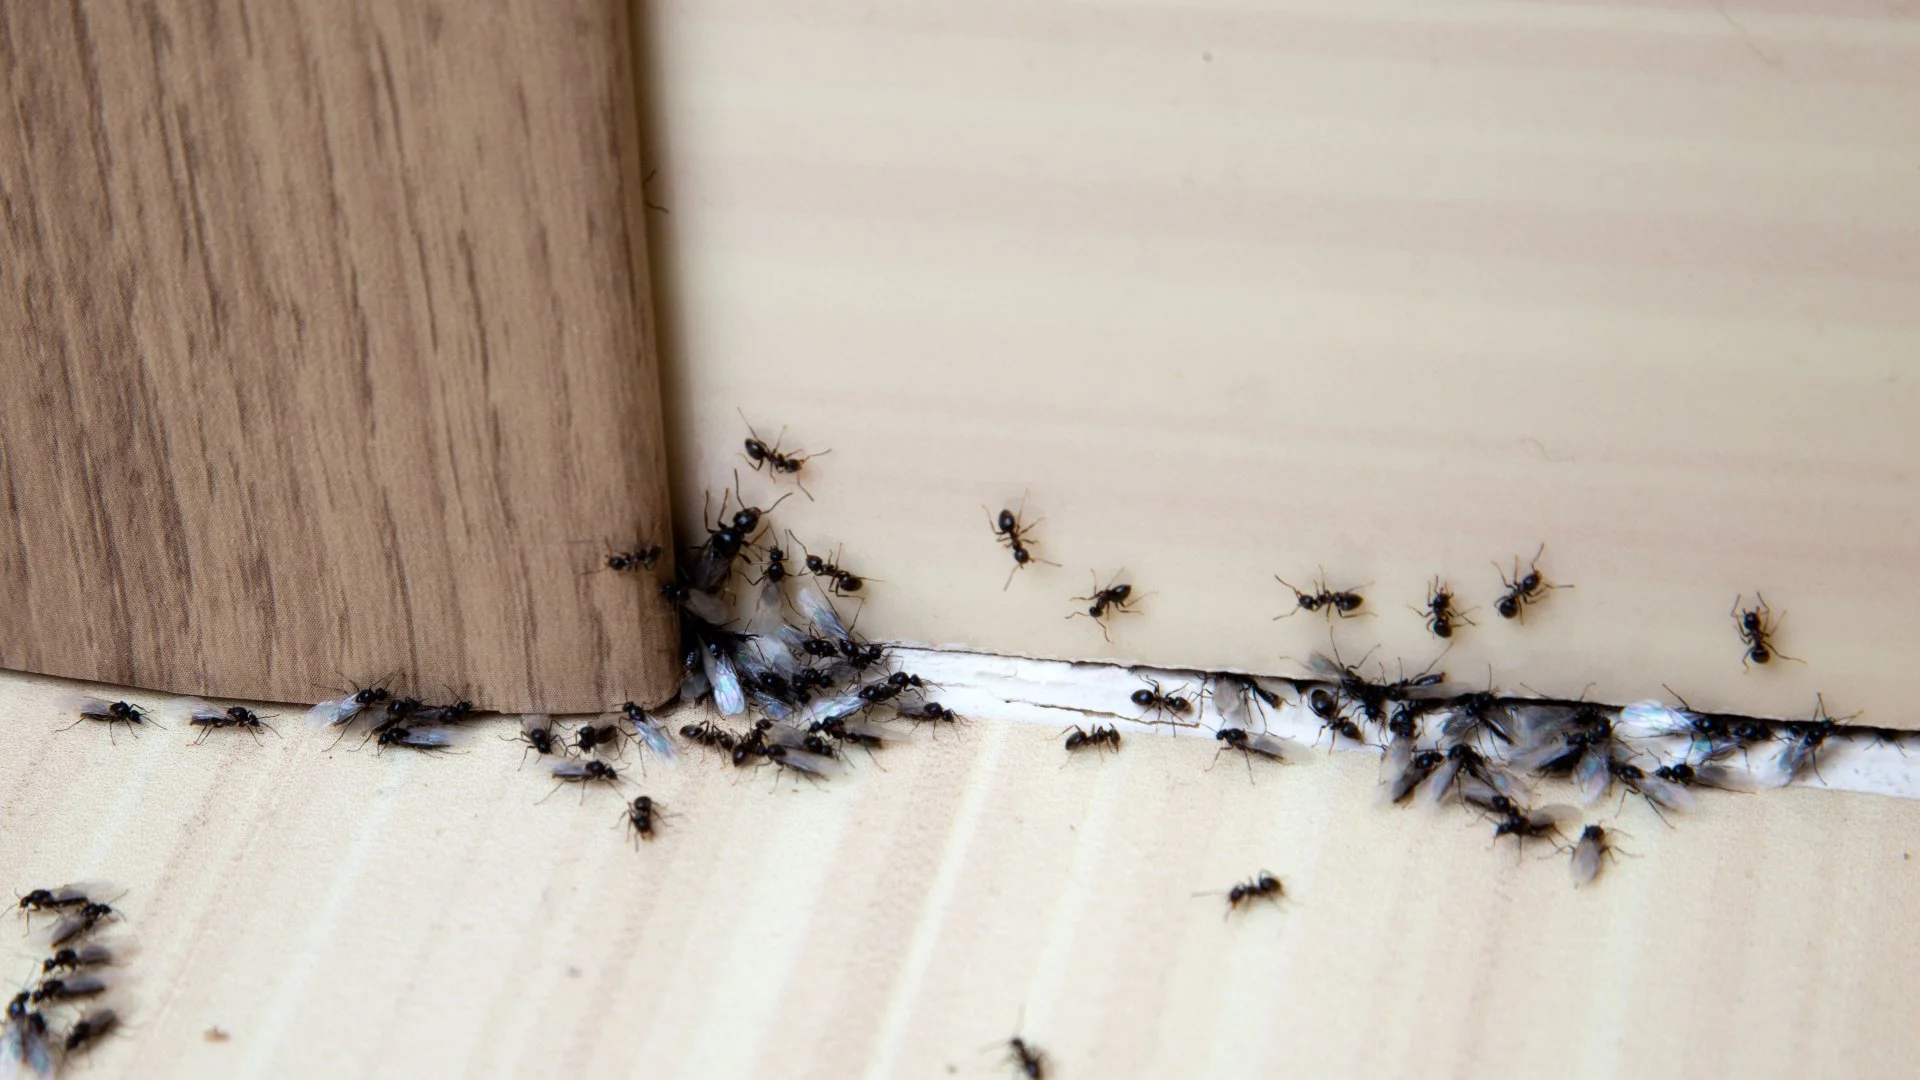 Are You Seeing Ants Inside Your Home? Don’t Panic - Here’s What to Do!